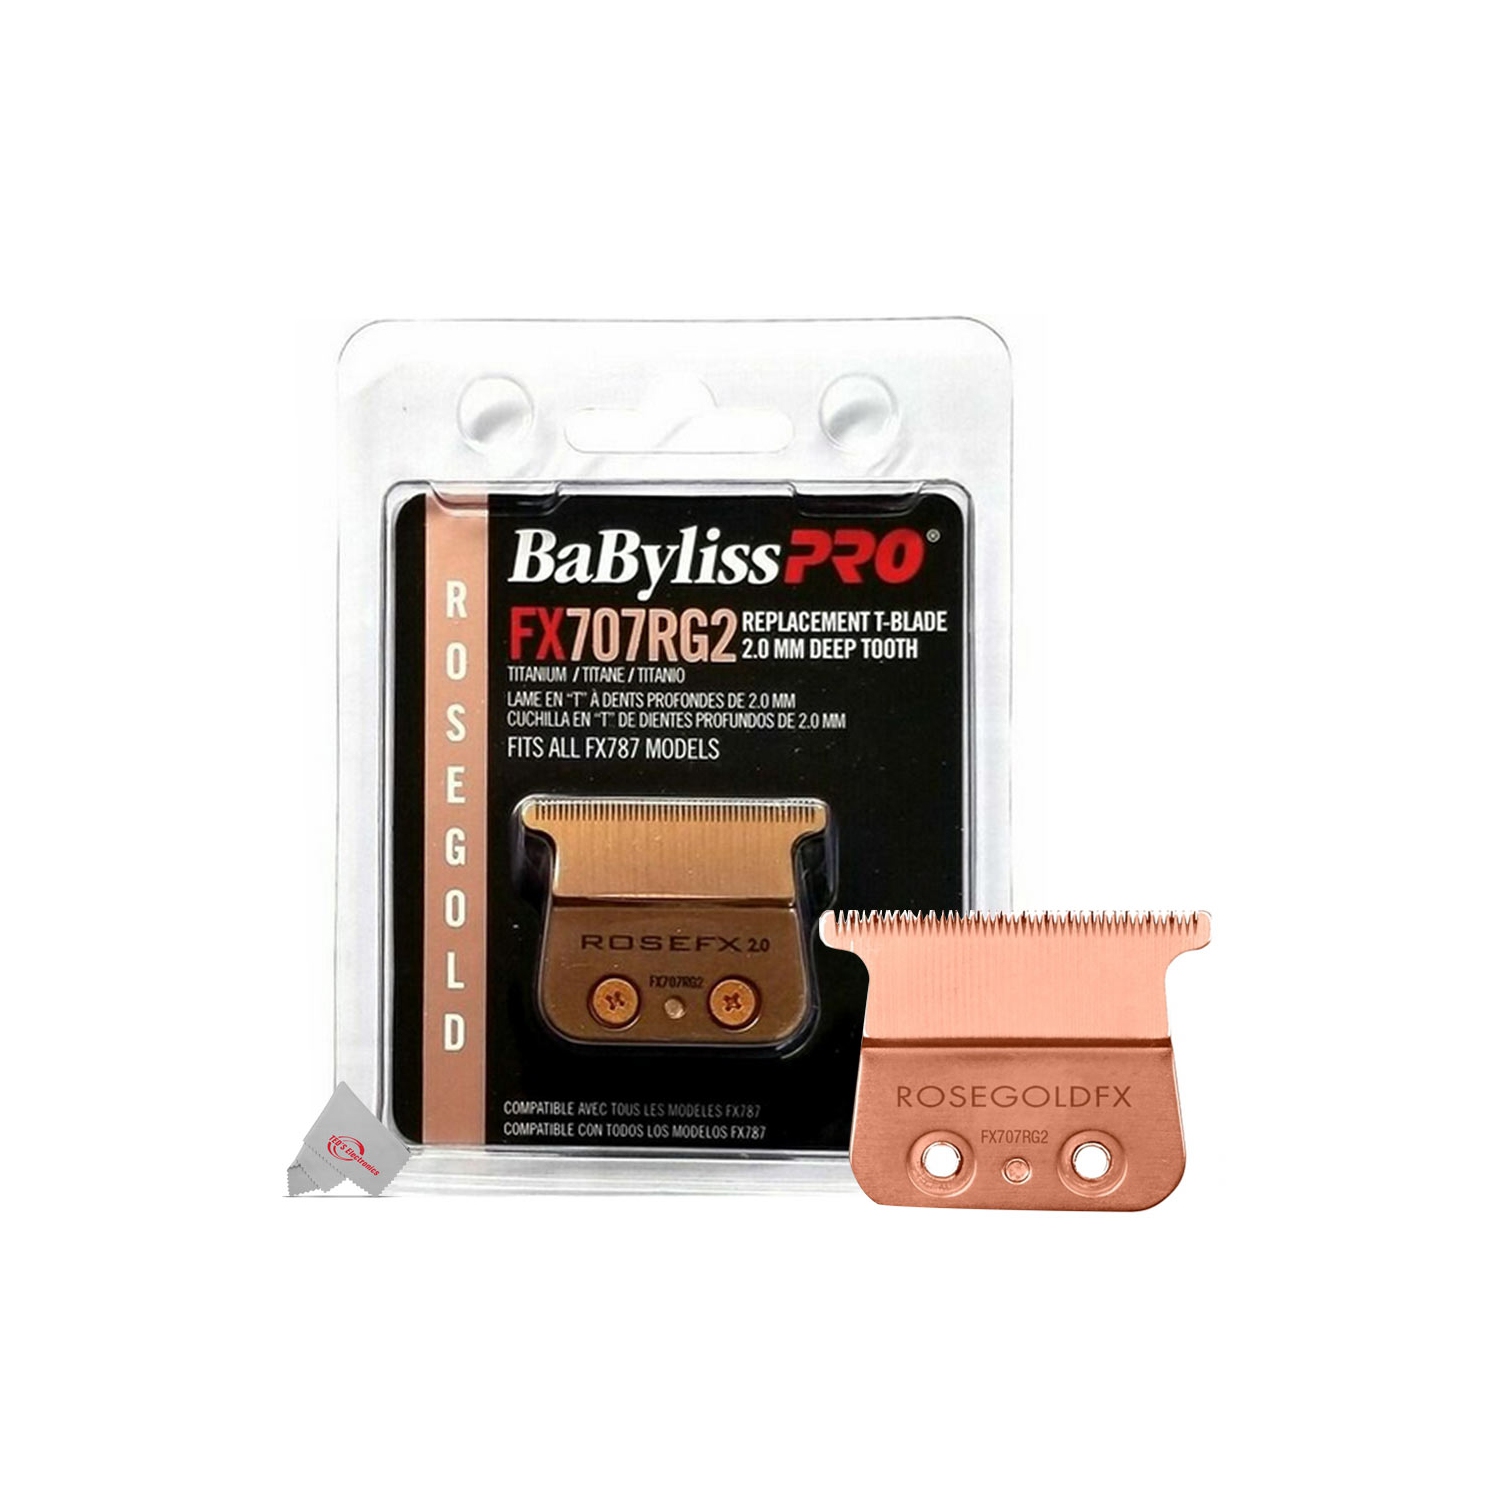 Babyliss Pro Rose Gold FX707RG2 Replacement Deep Tooth T-Blade 2.0MM - International Model